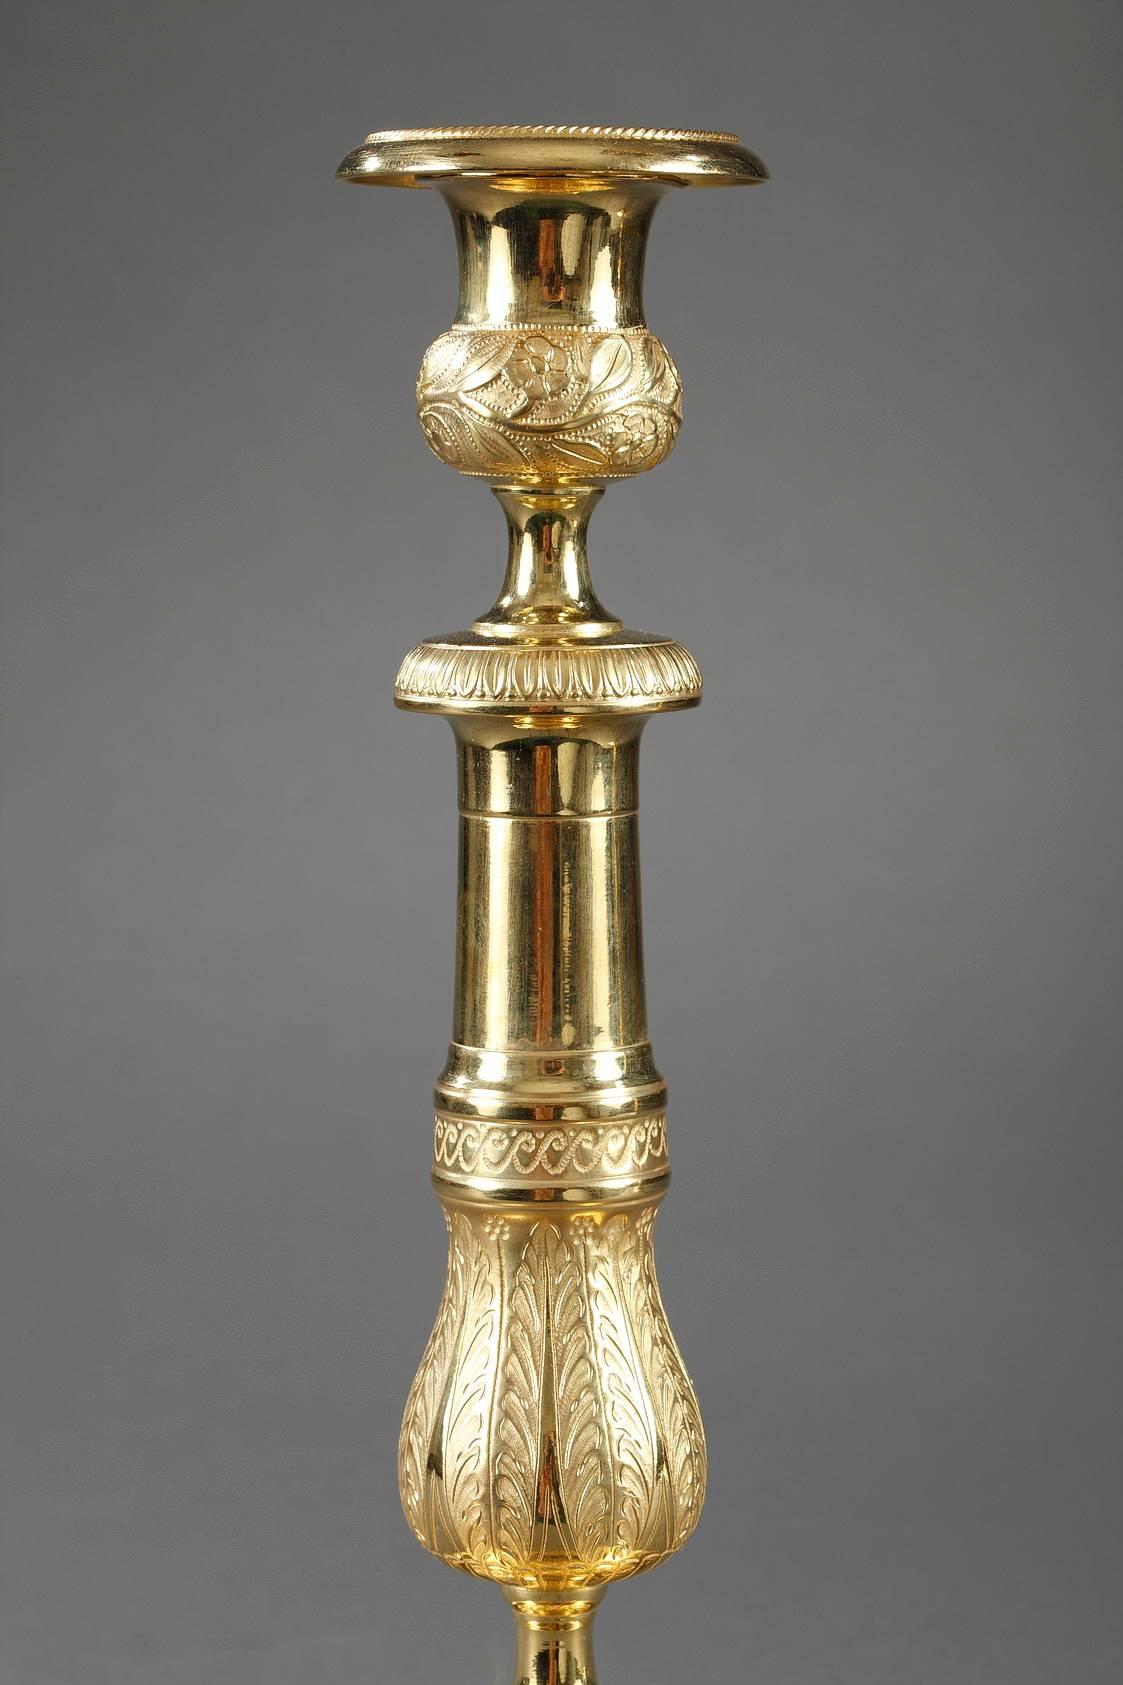 Pair of candlesticks in gilded and sculpted bronze. The stem is adorned with a frieze of Greek waves that separate the upper, polished part from the lower part that is richly decorated with palmettes, small flowers, and gadrooning. It is topped by a